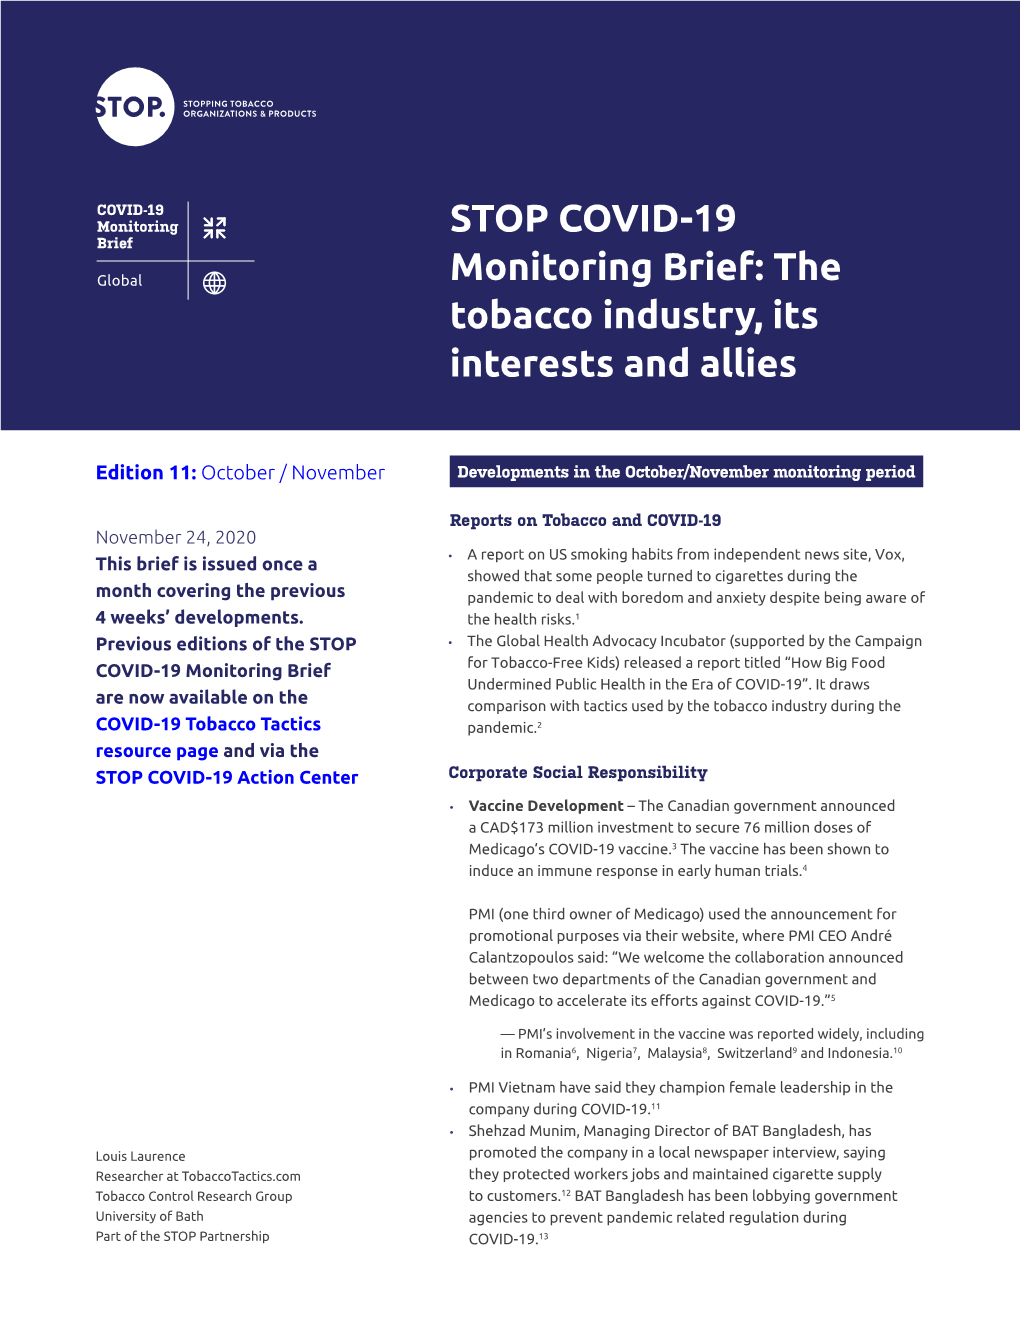 STOP COVID-19 Monitoring Brief: the Tobacco Industry, Its Interests and Allies